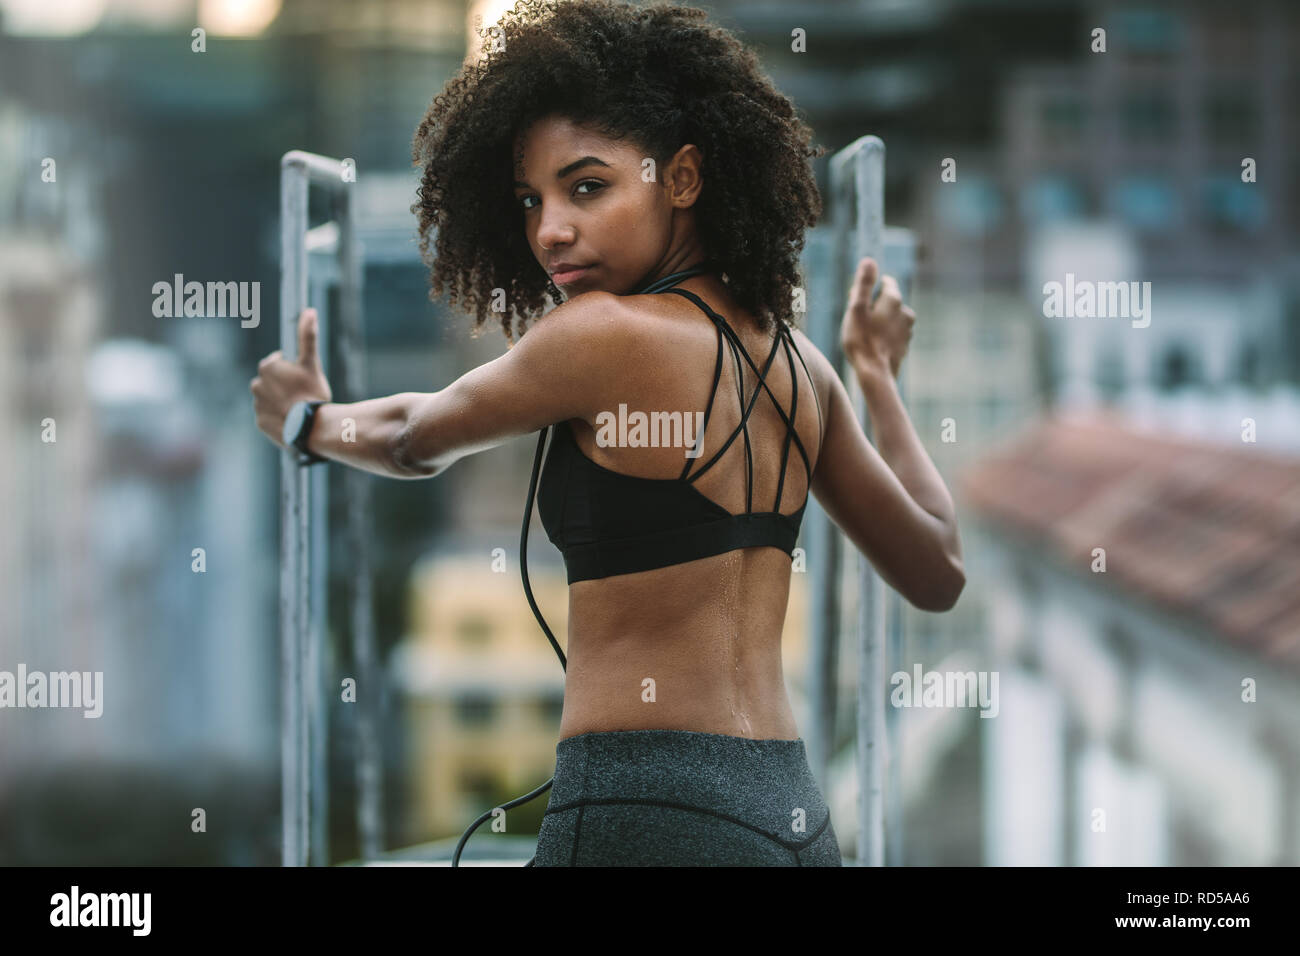 Portrait of an afro american athlete standing holding rooftop staircase. Female athlete doing fitness training standing on rooftop. Stock Photo